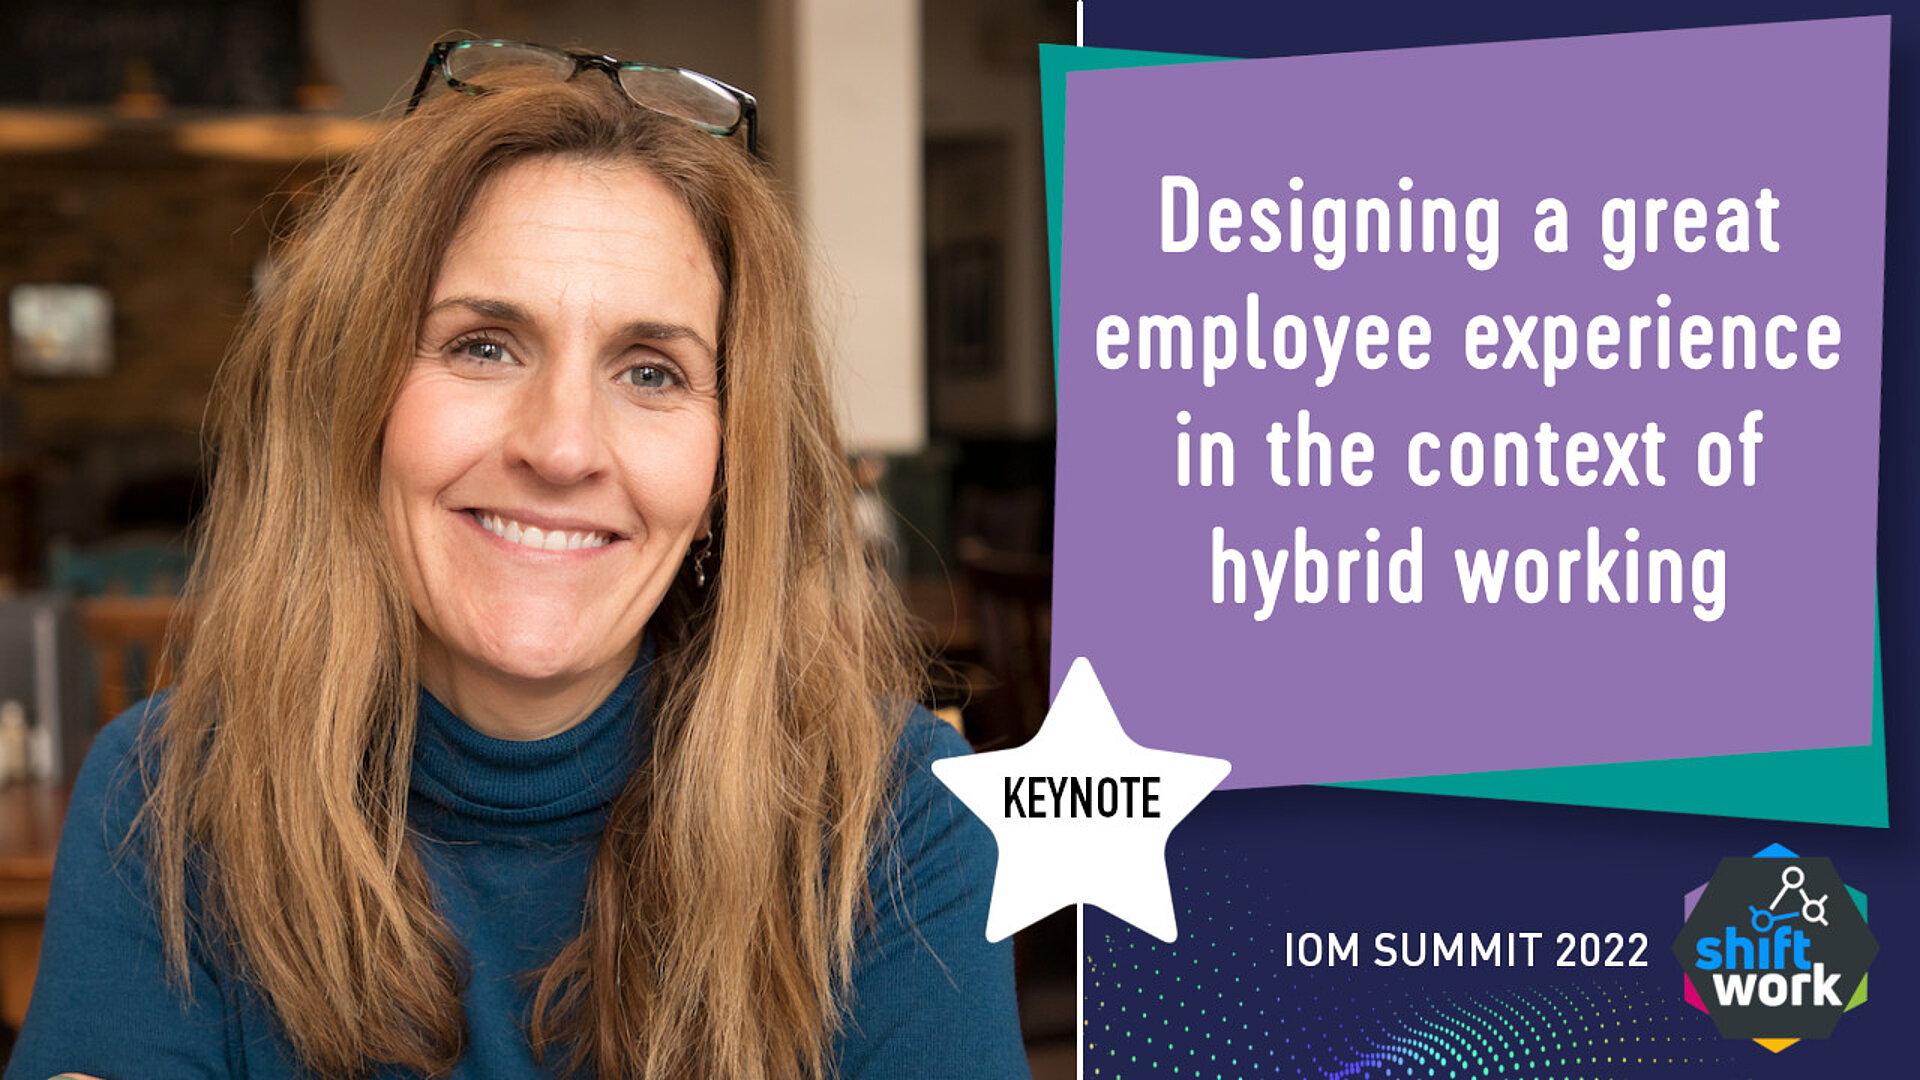 Designing a great employee experience in the context of hybrid working